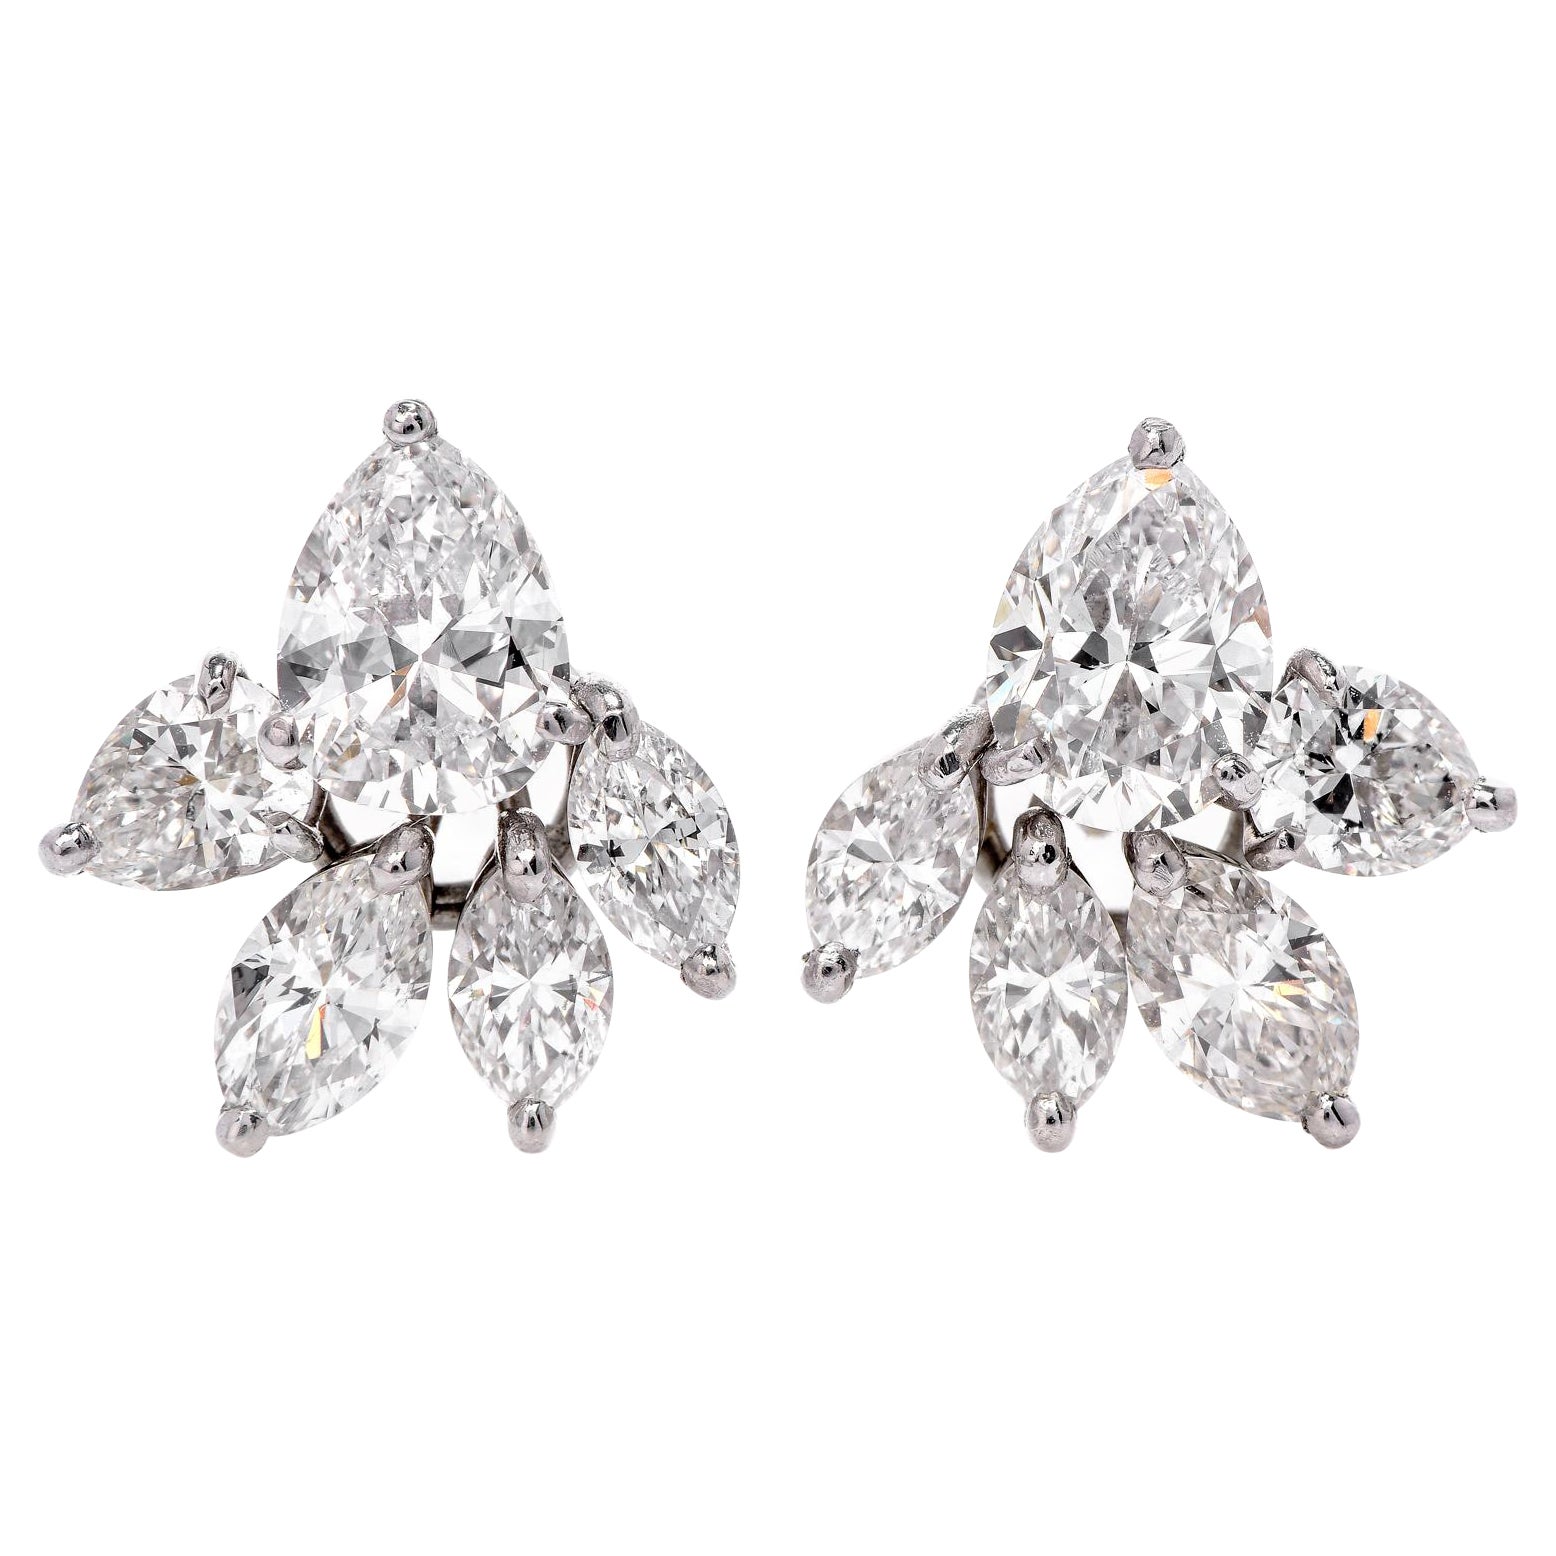 Exceptional D Color 3.82cts Pear Diamond Cluster Platinum Stud Earrings